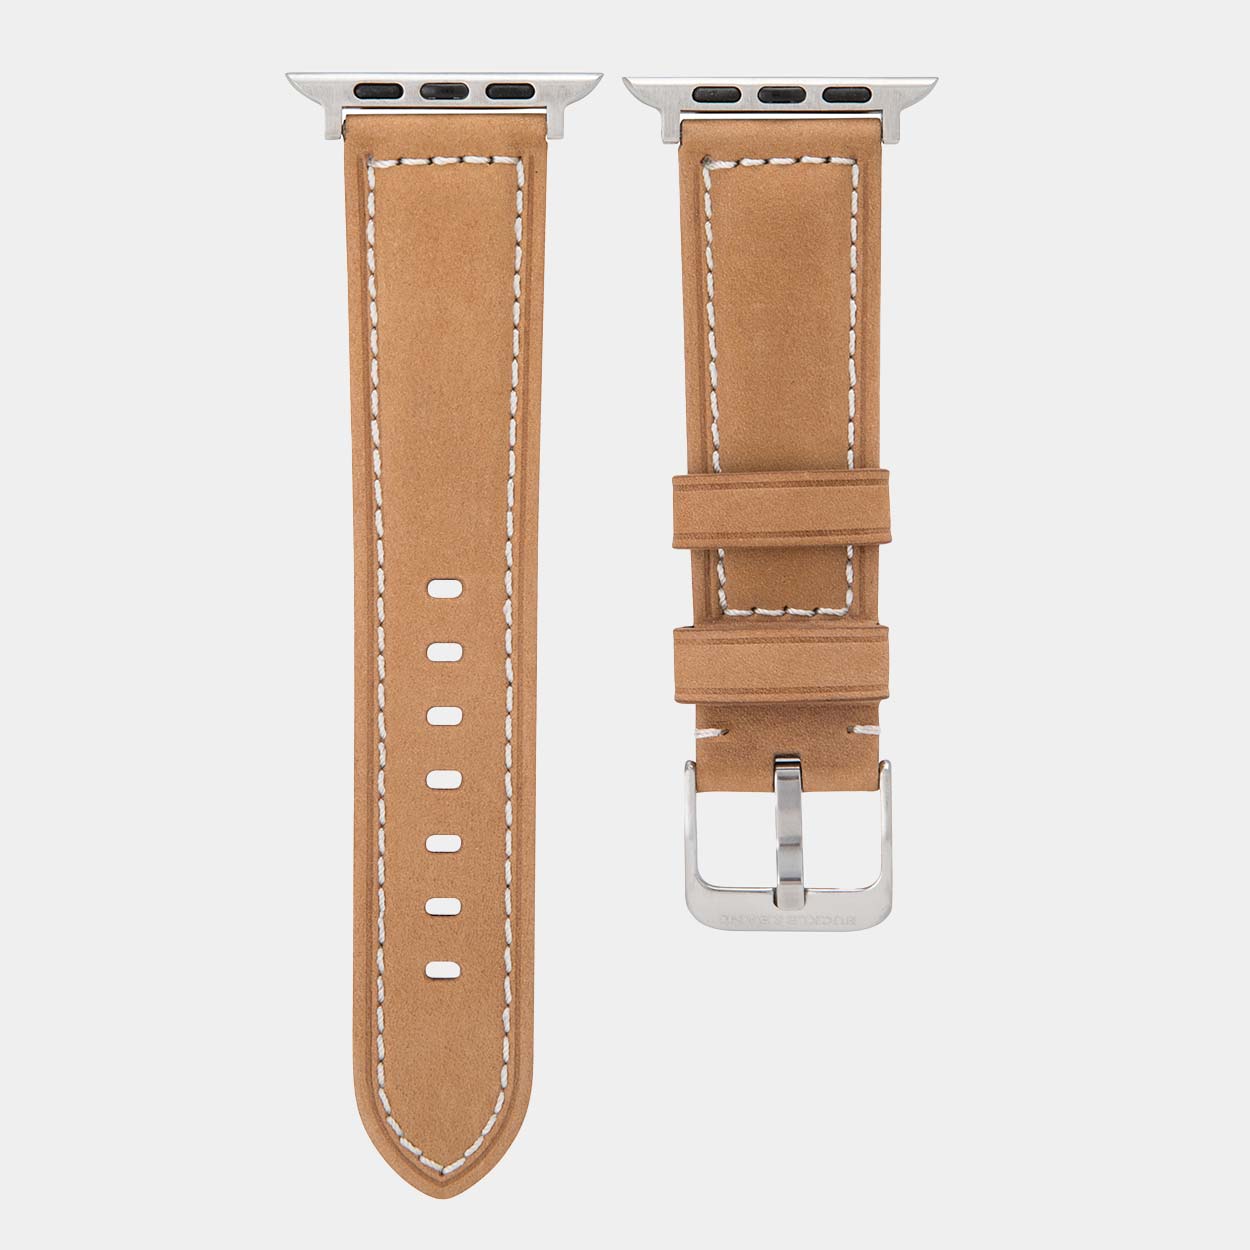 Mila Apple Watch Strap - Light Brown Suede - Buckle & Band - MIL-38-BRN-SI